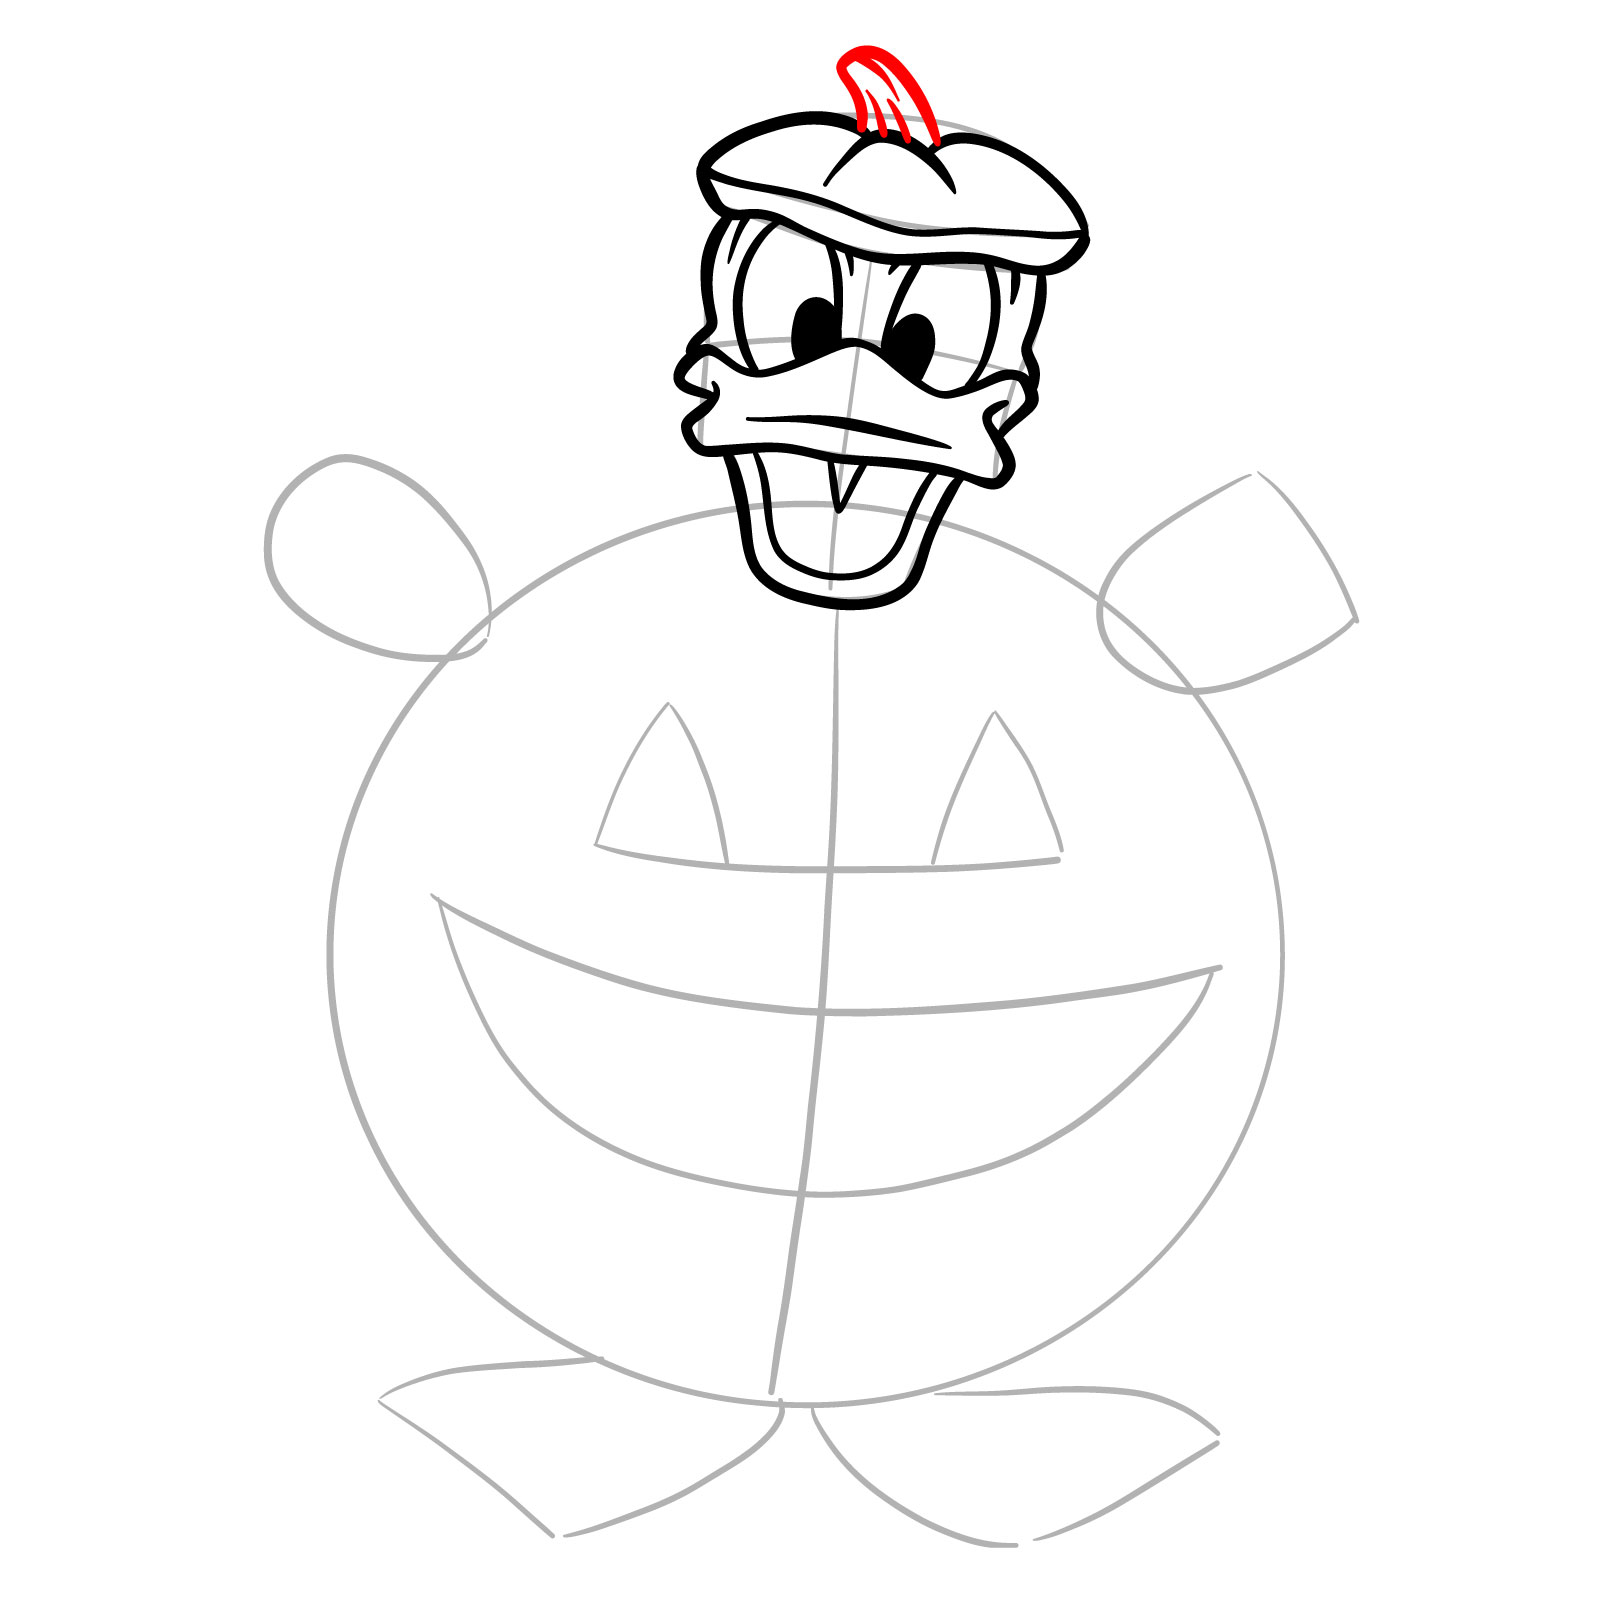 How to draw Halloween Donald Duck in a jack o'lantern - step 12